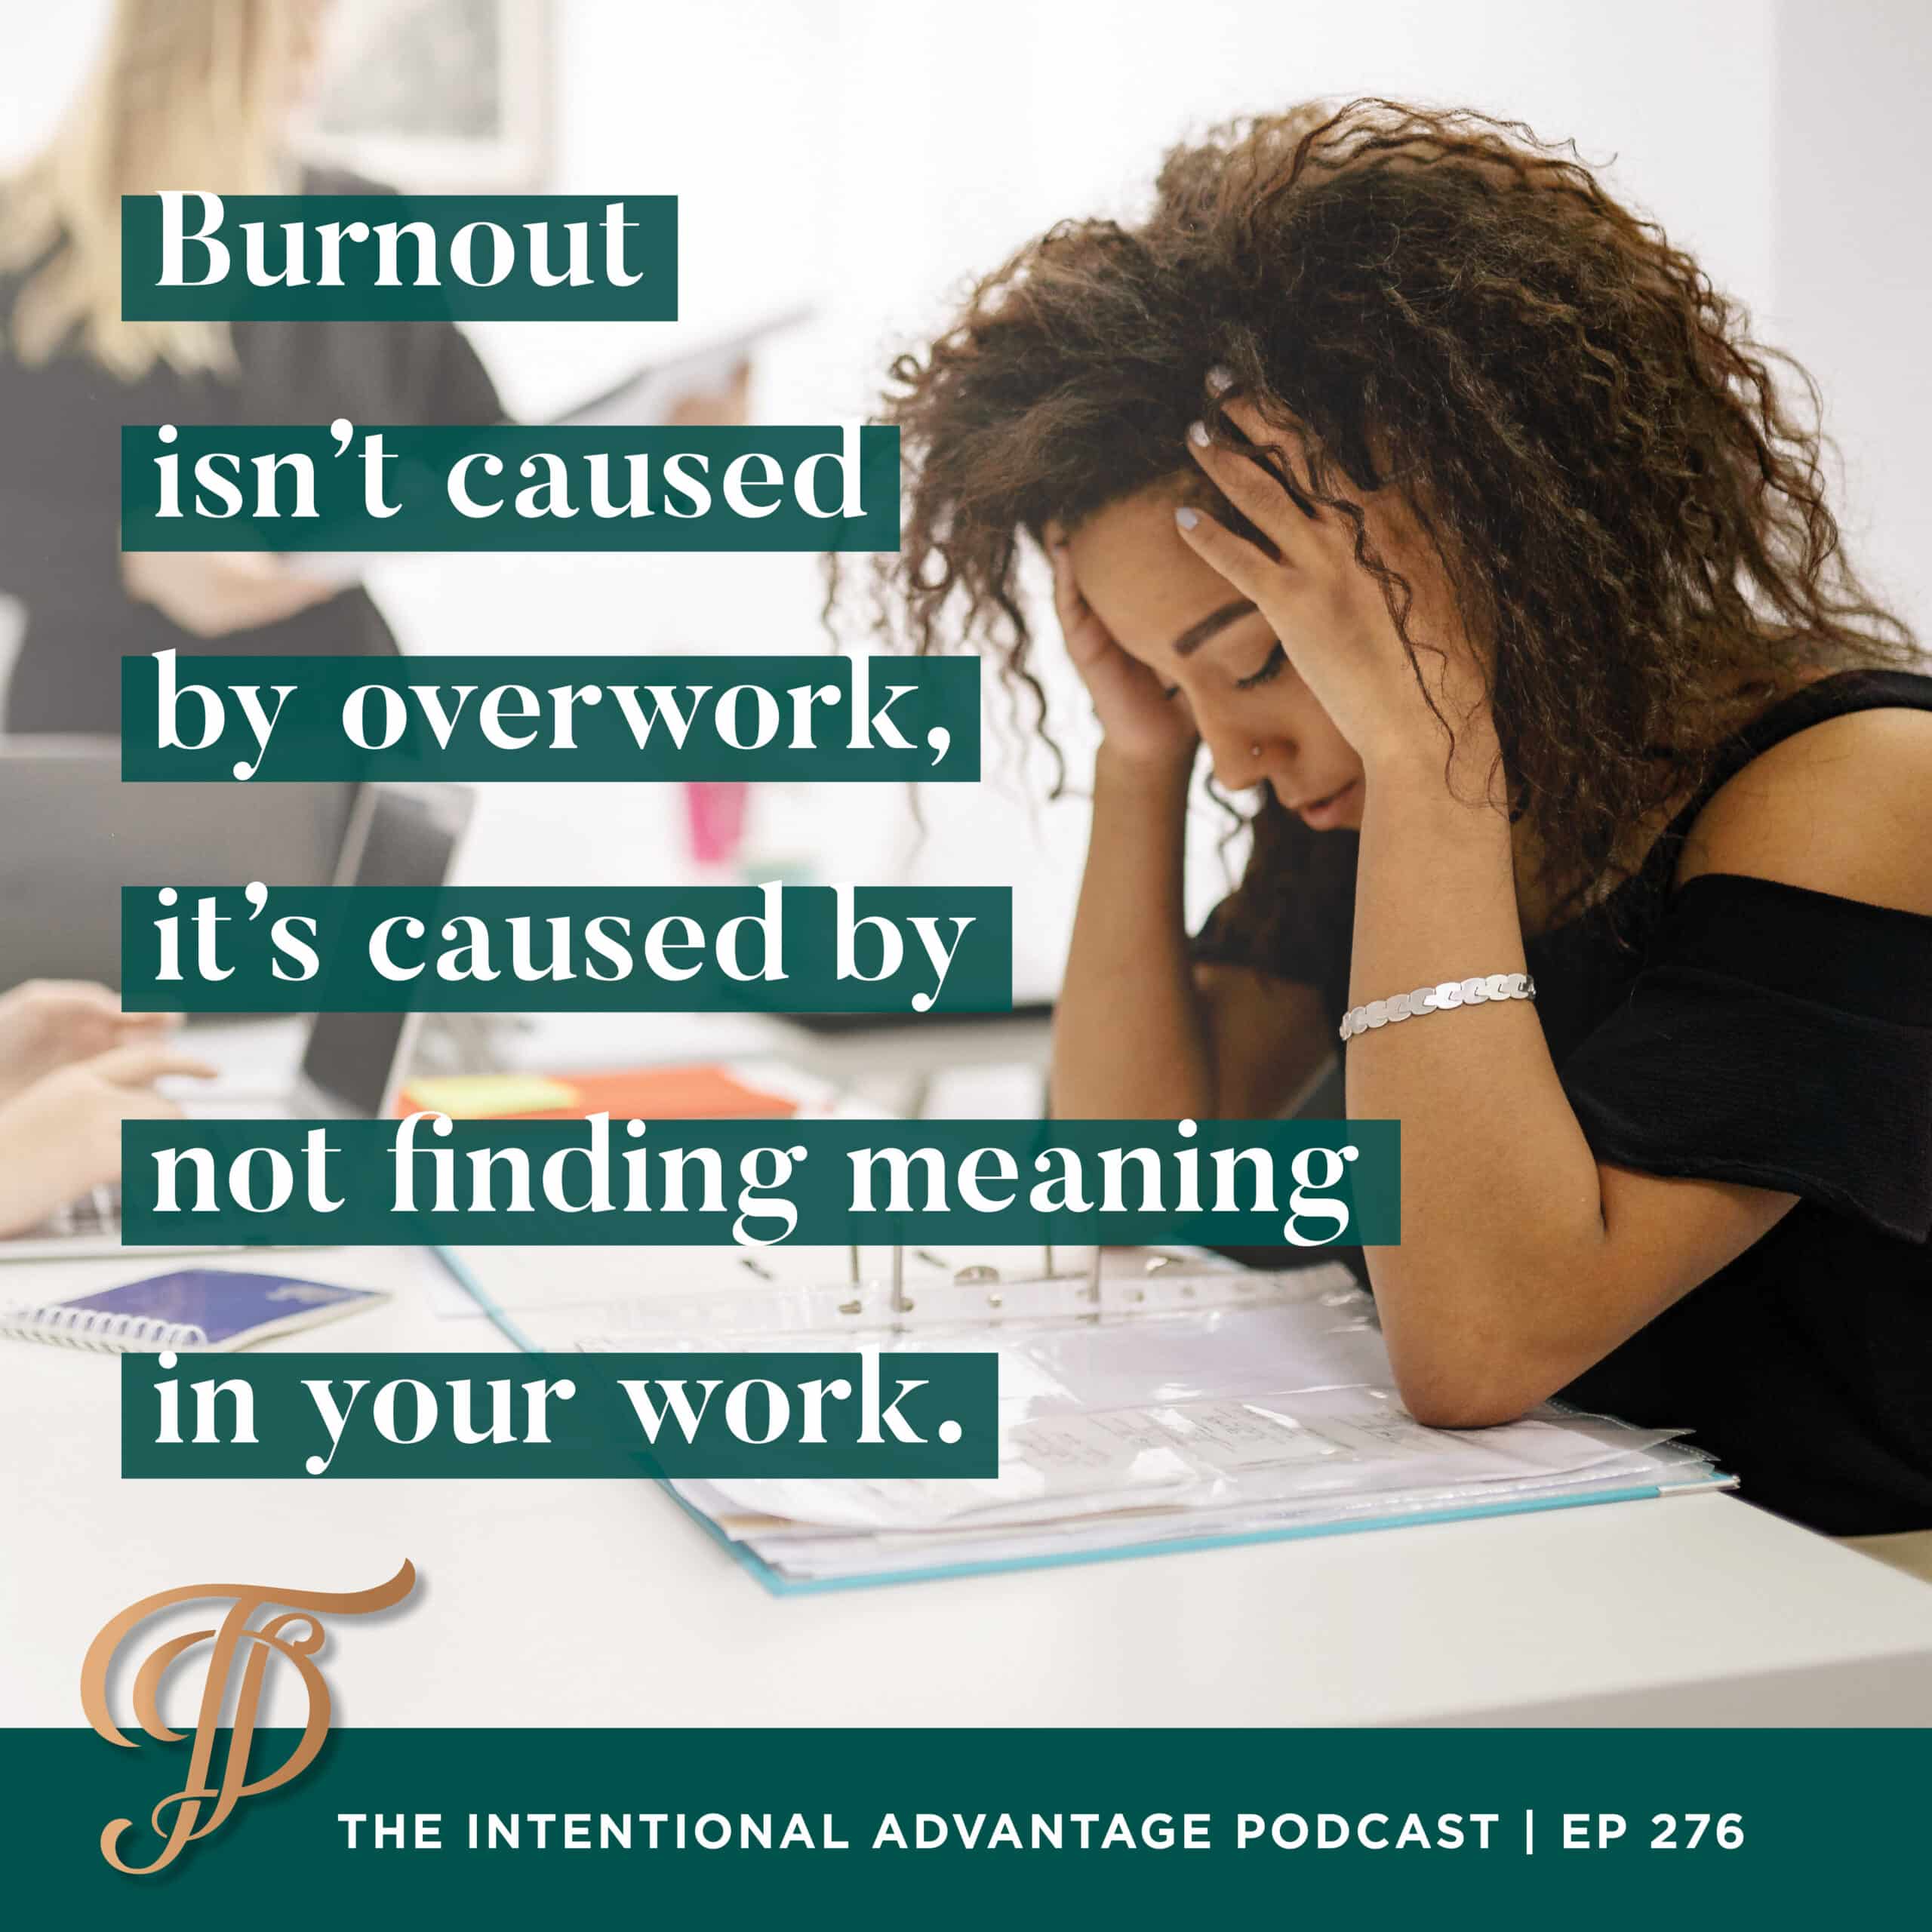 How to avoid burnout at work with Tanya Dalton